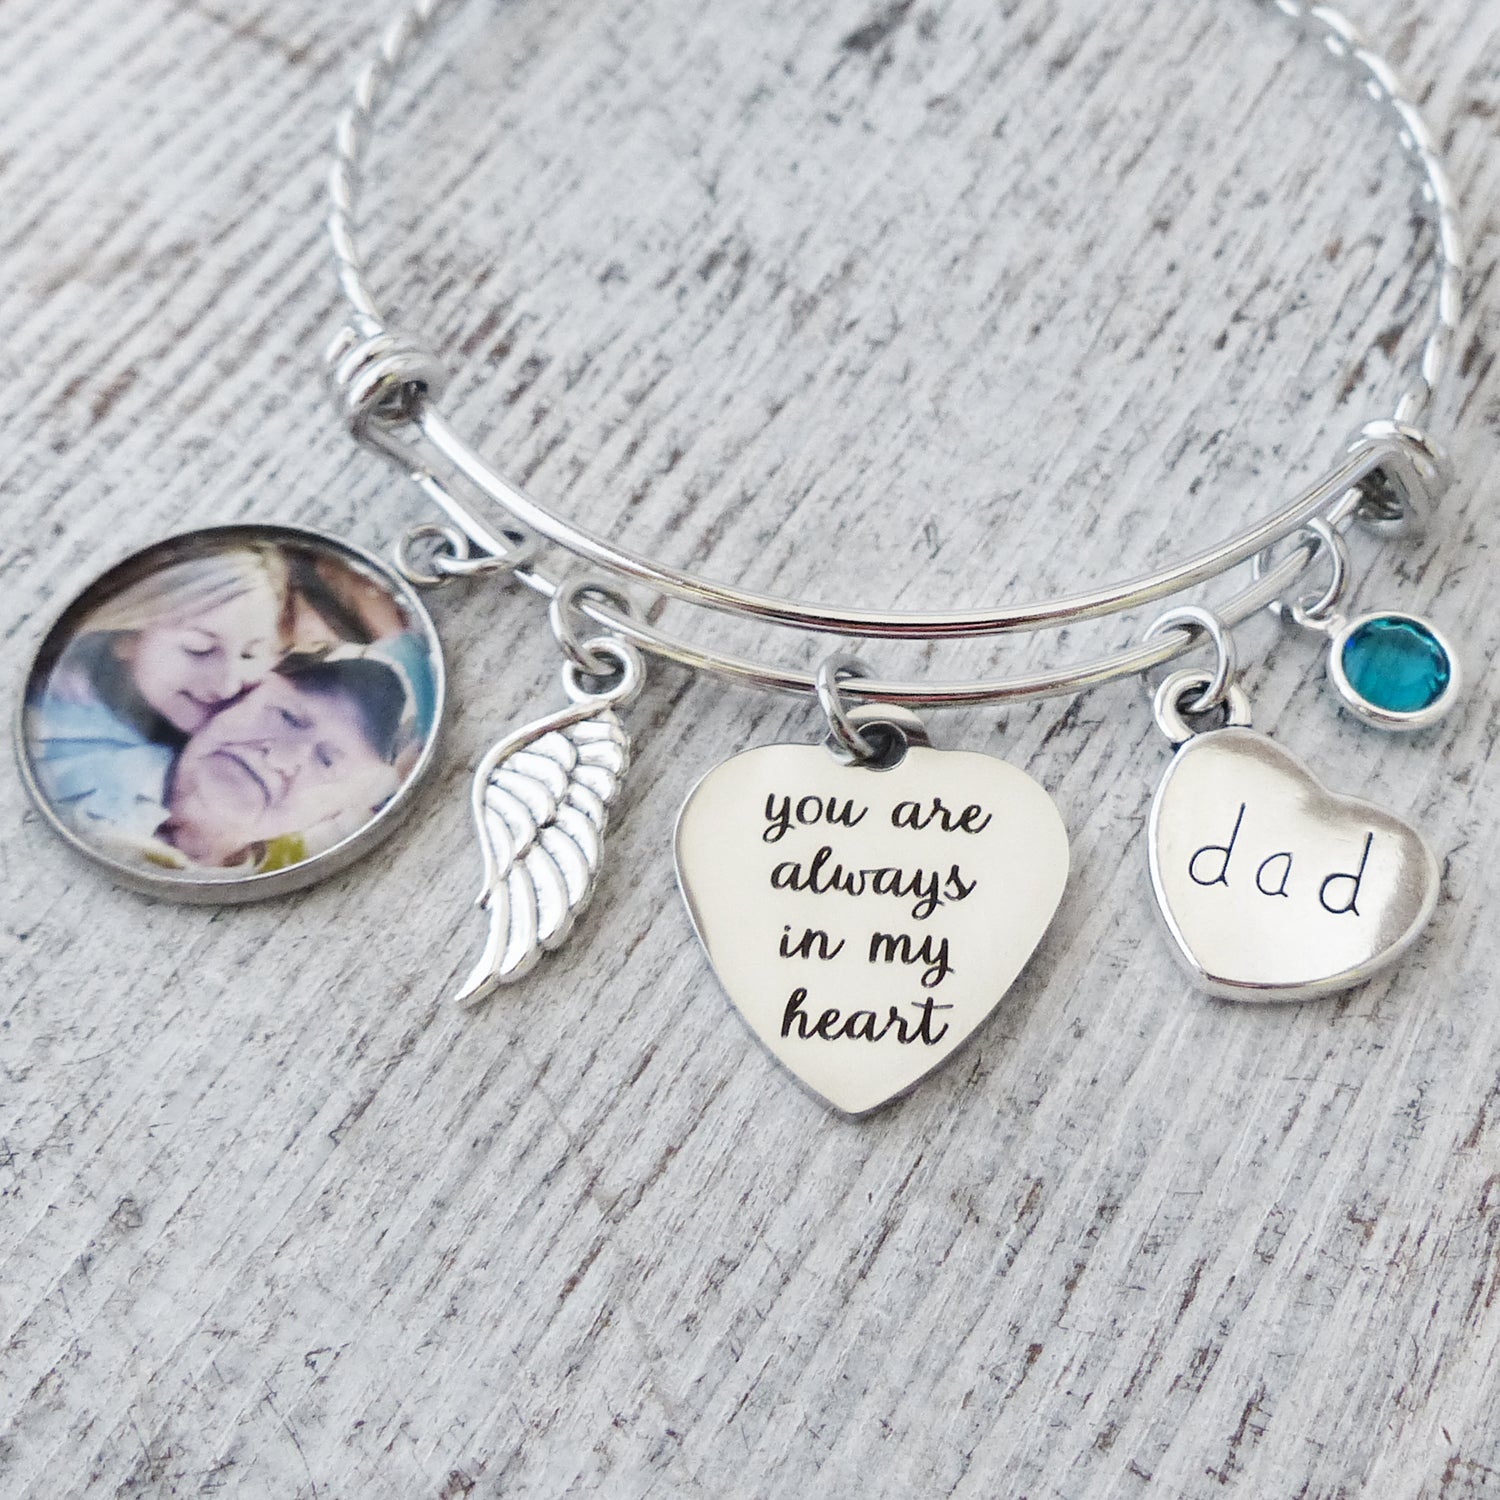 remembrance jewelry for her-bangle bracelet with you are always in my heart and a small round photo pendant-dad charm and angel wing with custom birthstone